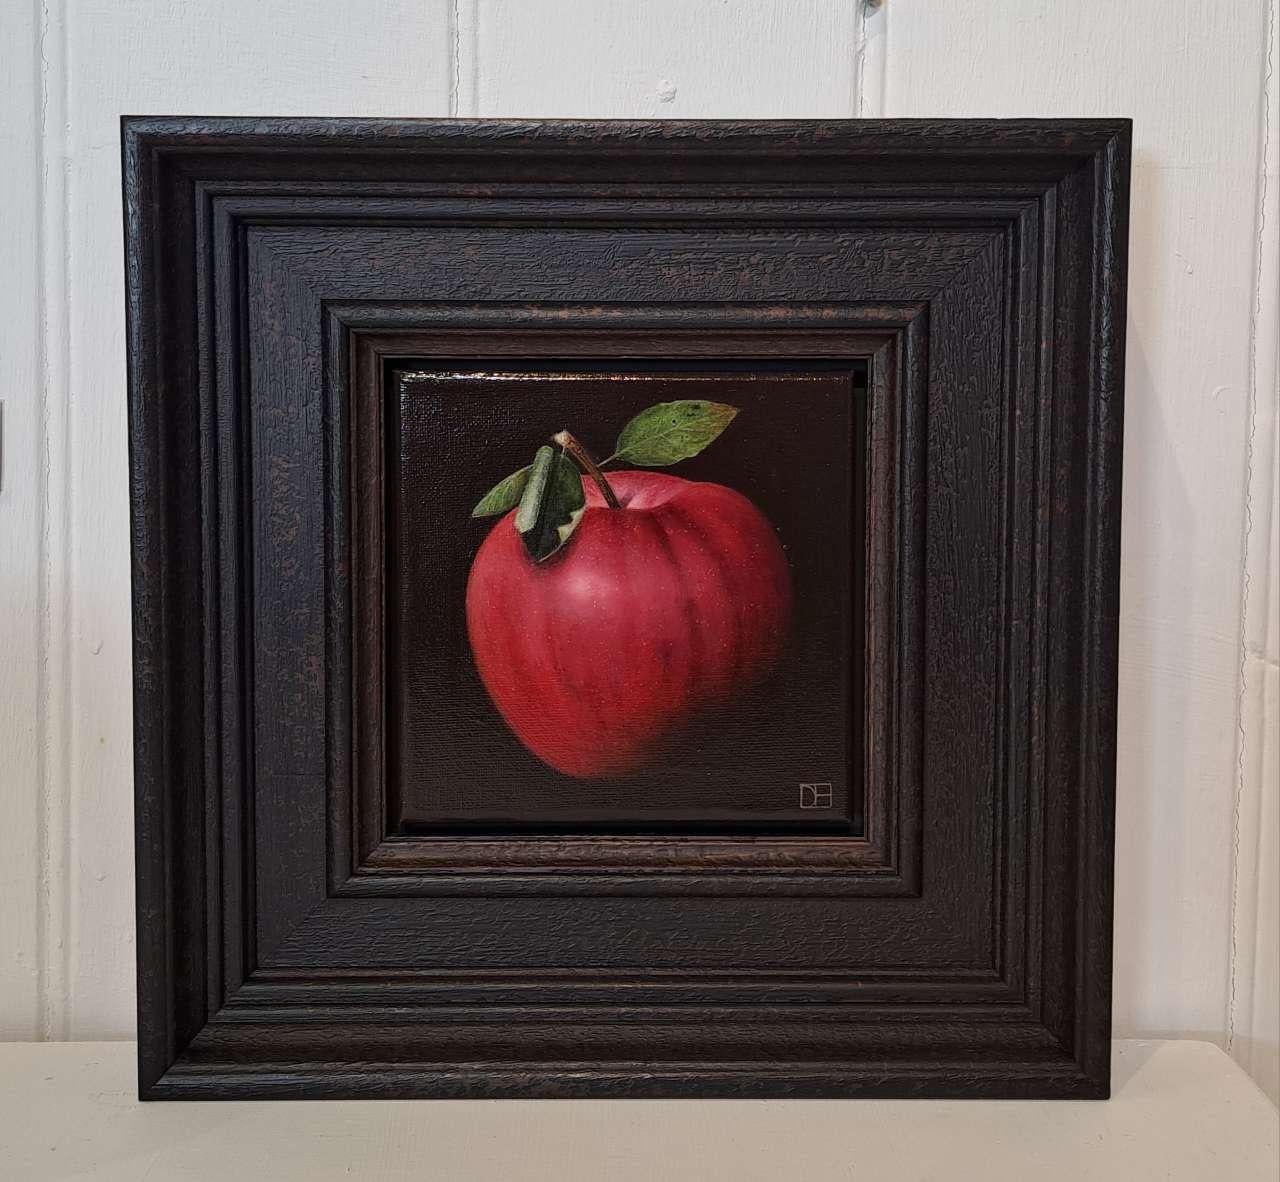 
Very Shiny Very Red Apple is an original oil painting by Dani Humberstone as part of her series of realistic oil paintings of fruit with a nod to baroque still life painting. The paintings are set in a heavy black wood layered frame.

ADDITIONAL